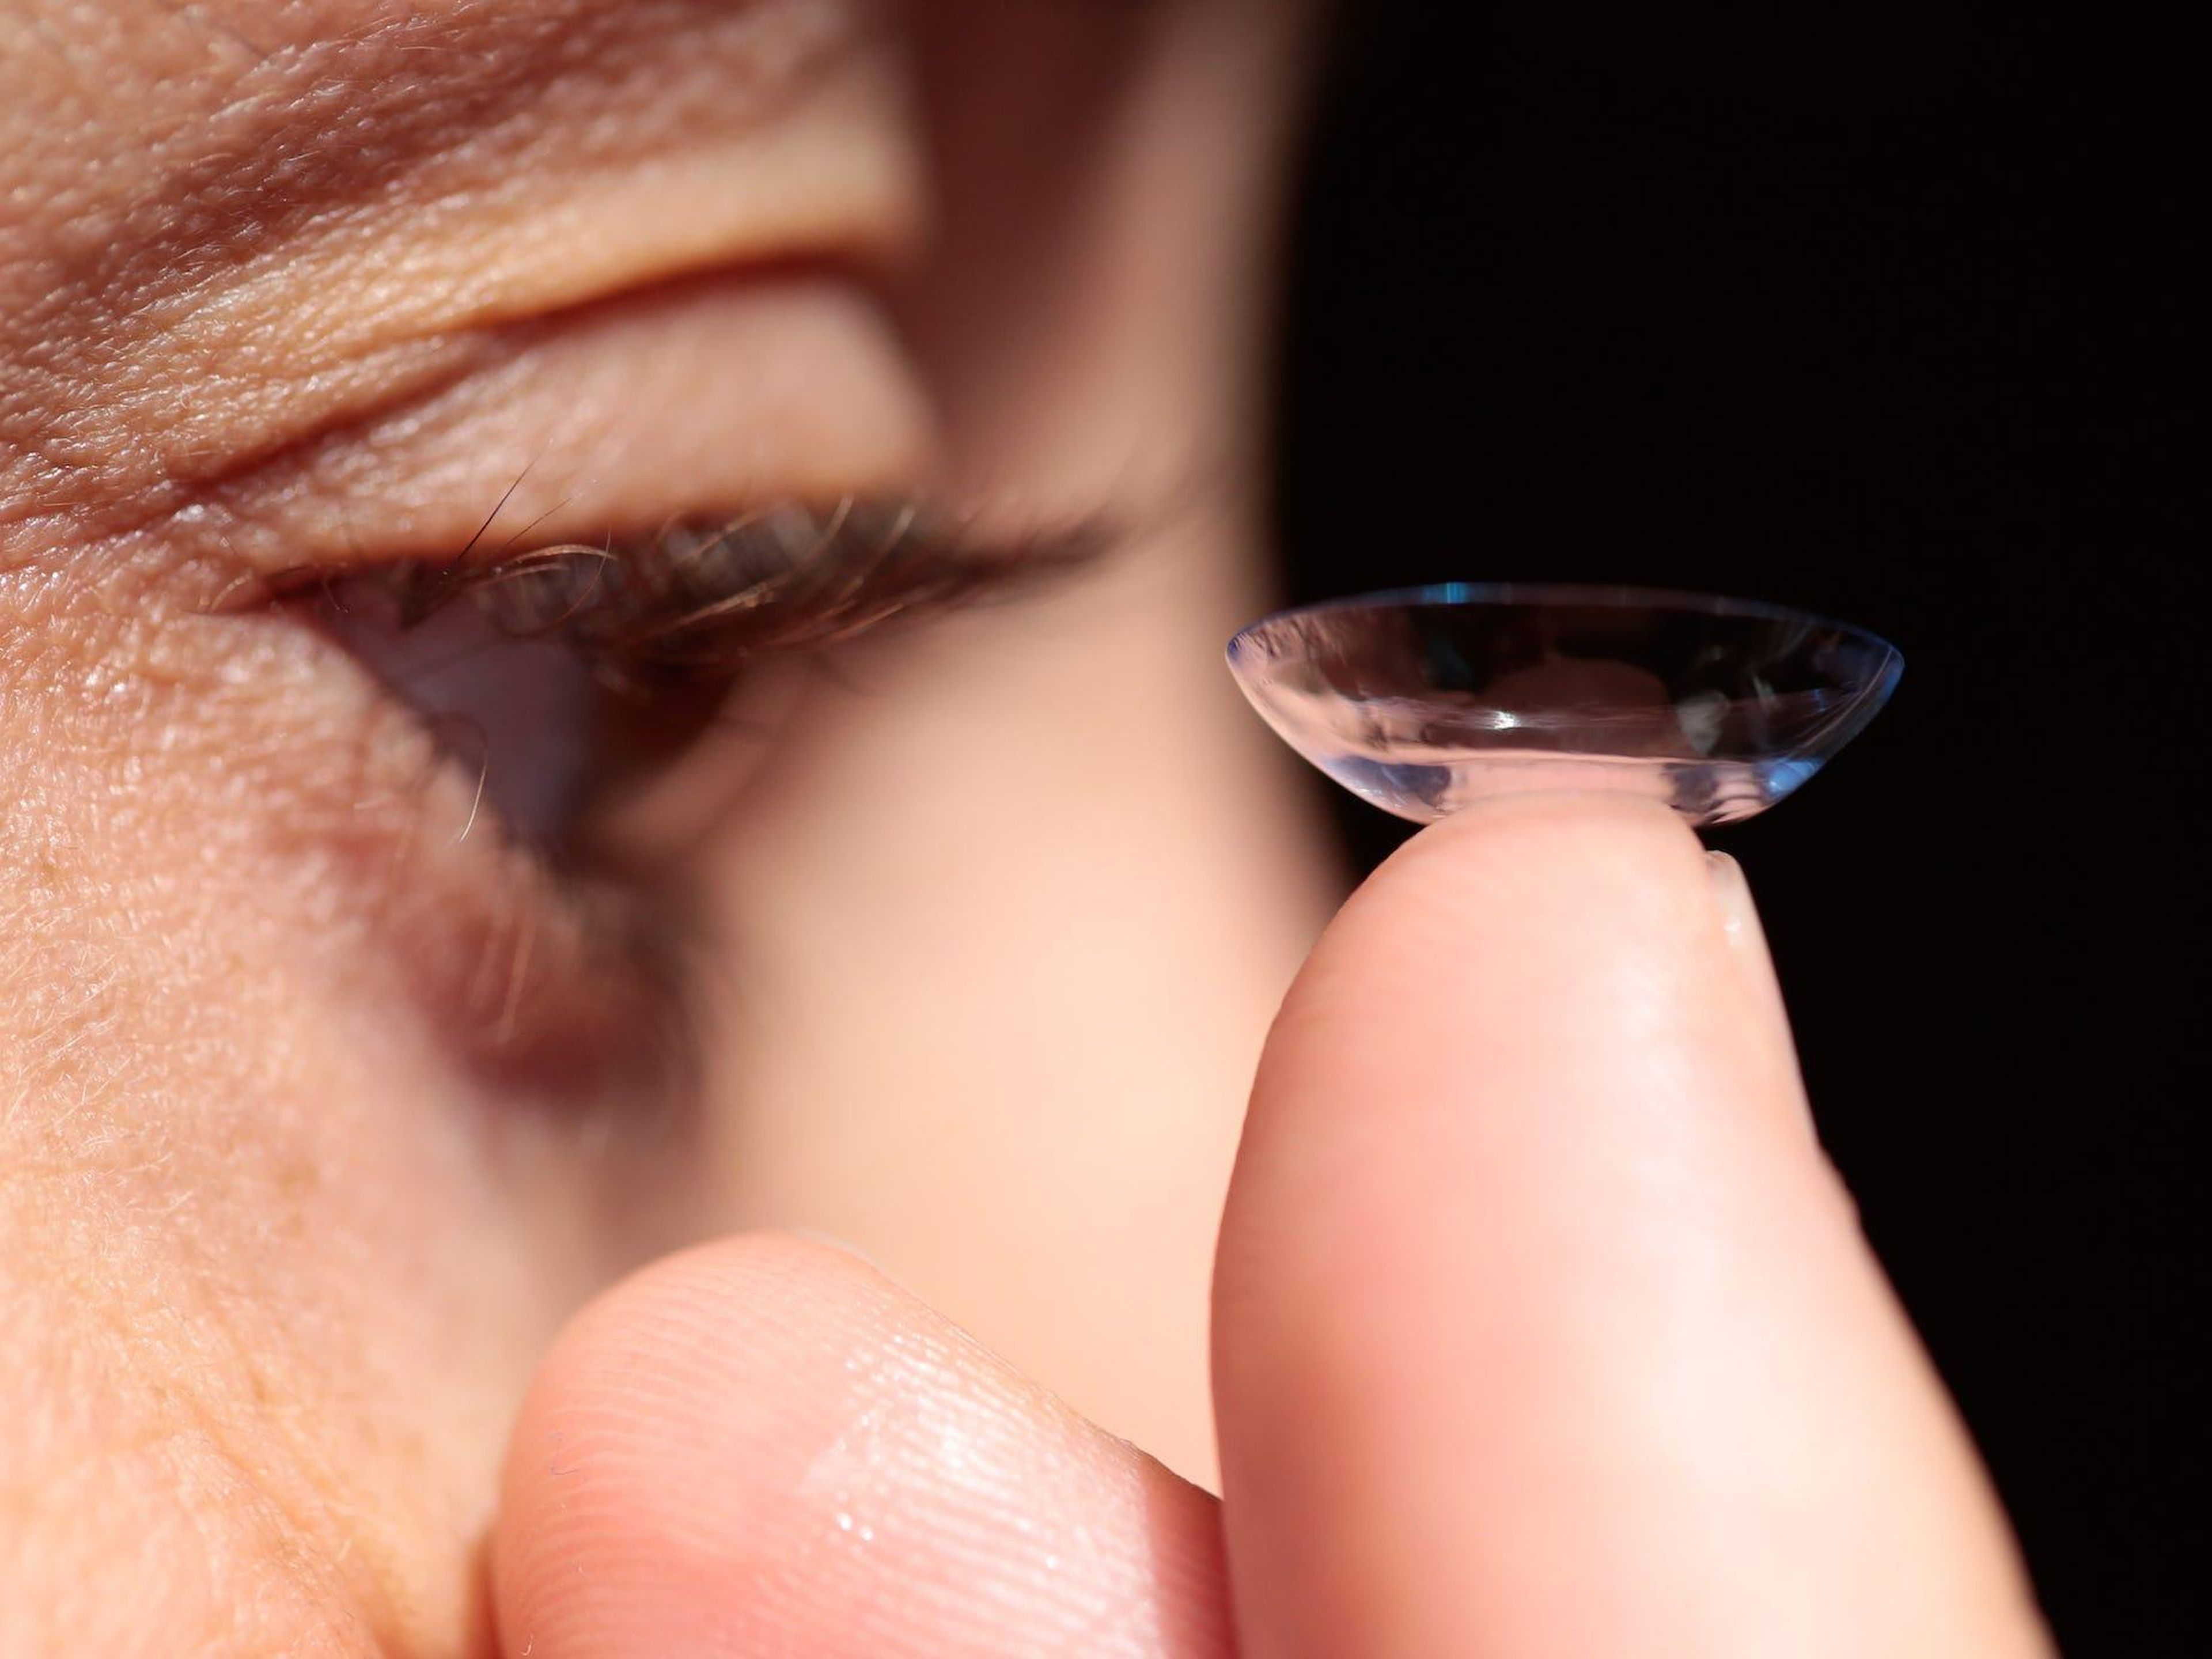 Some doctors are telling patients to switch from contact lenses to glasses to lower their risk of contracting the coronavirus